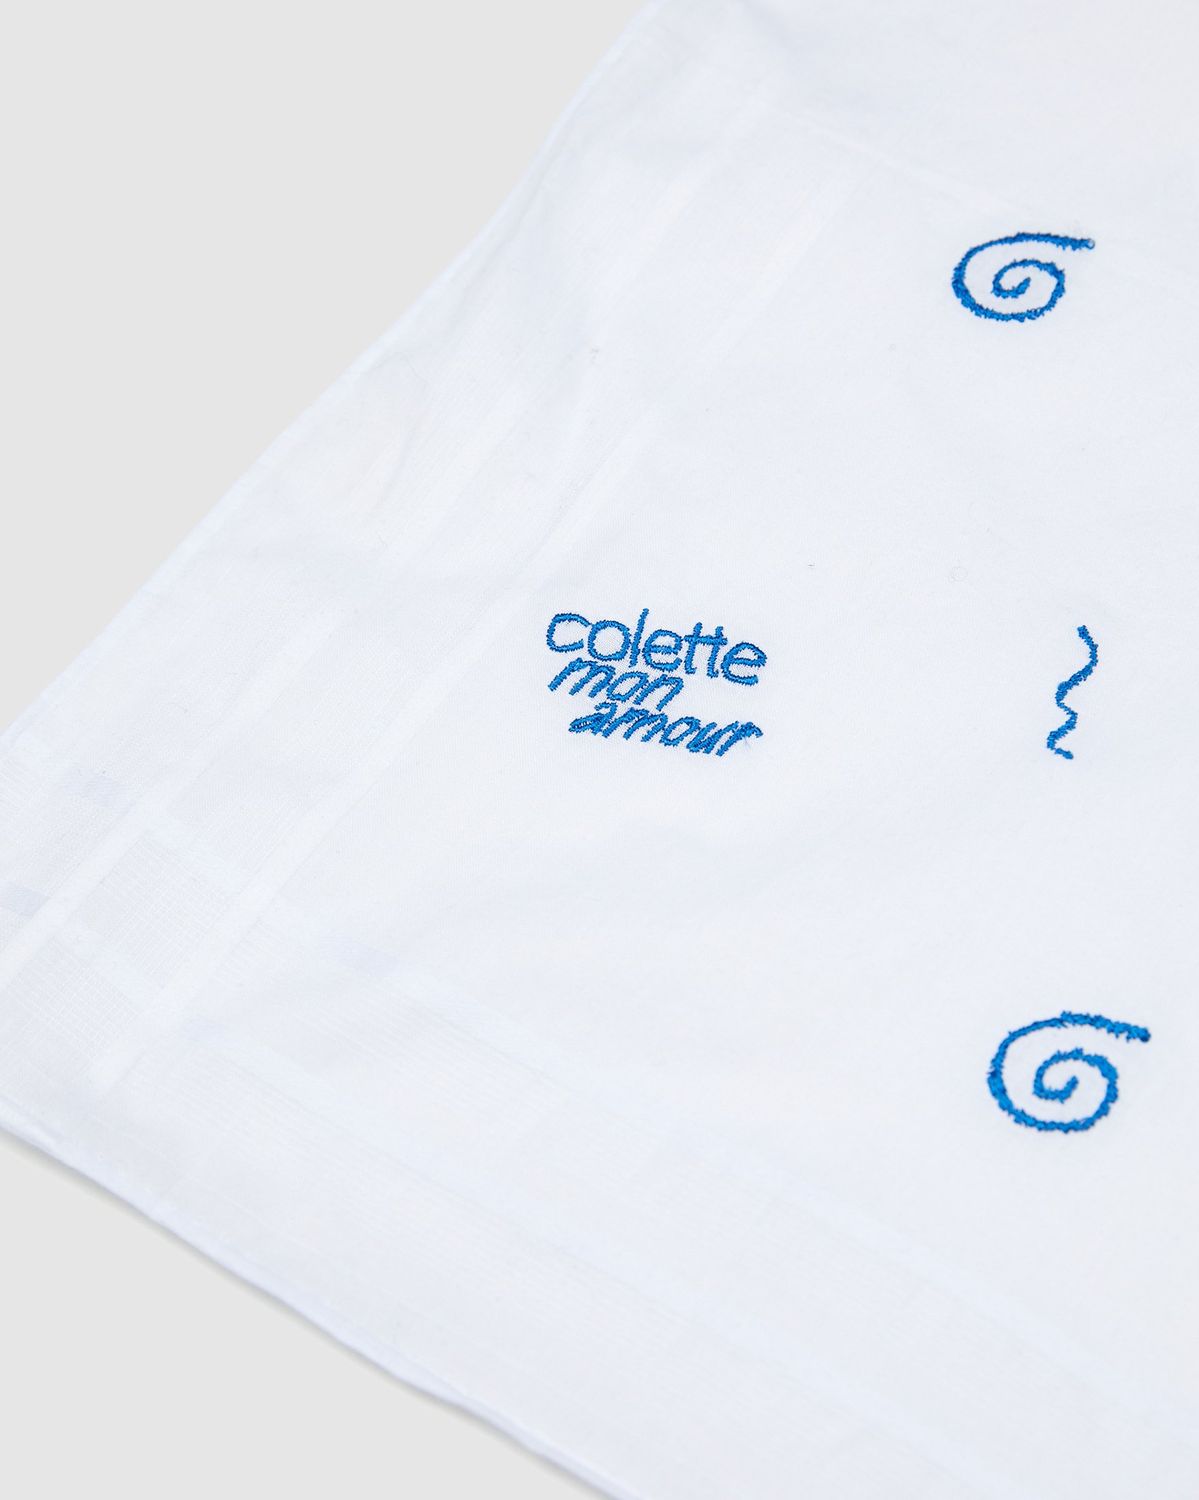 Colette Mon Amour x Thom Browne – White Embroidered Pocket Square - Bags - White - Image 3